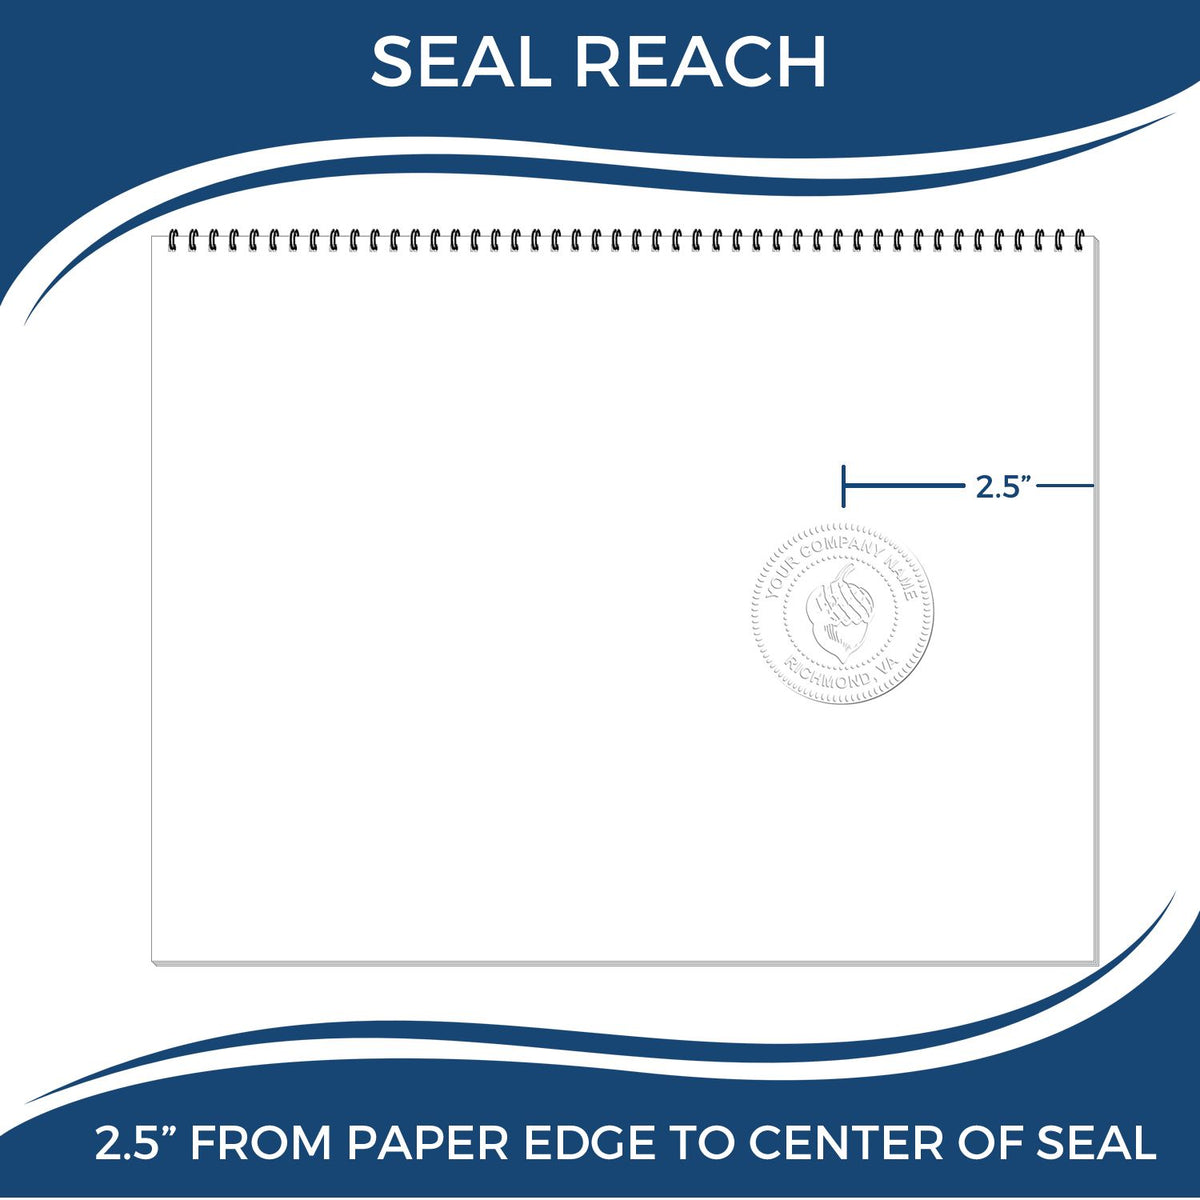 An infographic showing the seal reach which is represented by a ruler and a miniature seal image of the Heavy Duty Cast Iron Nebraska Land Surveyor Seal Embosser